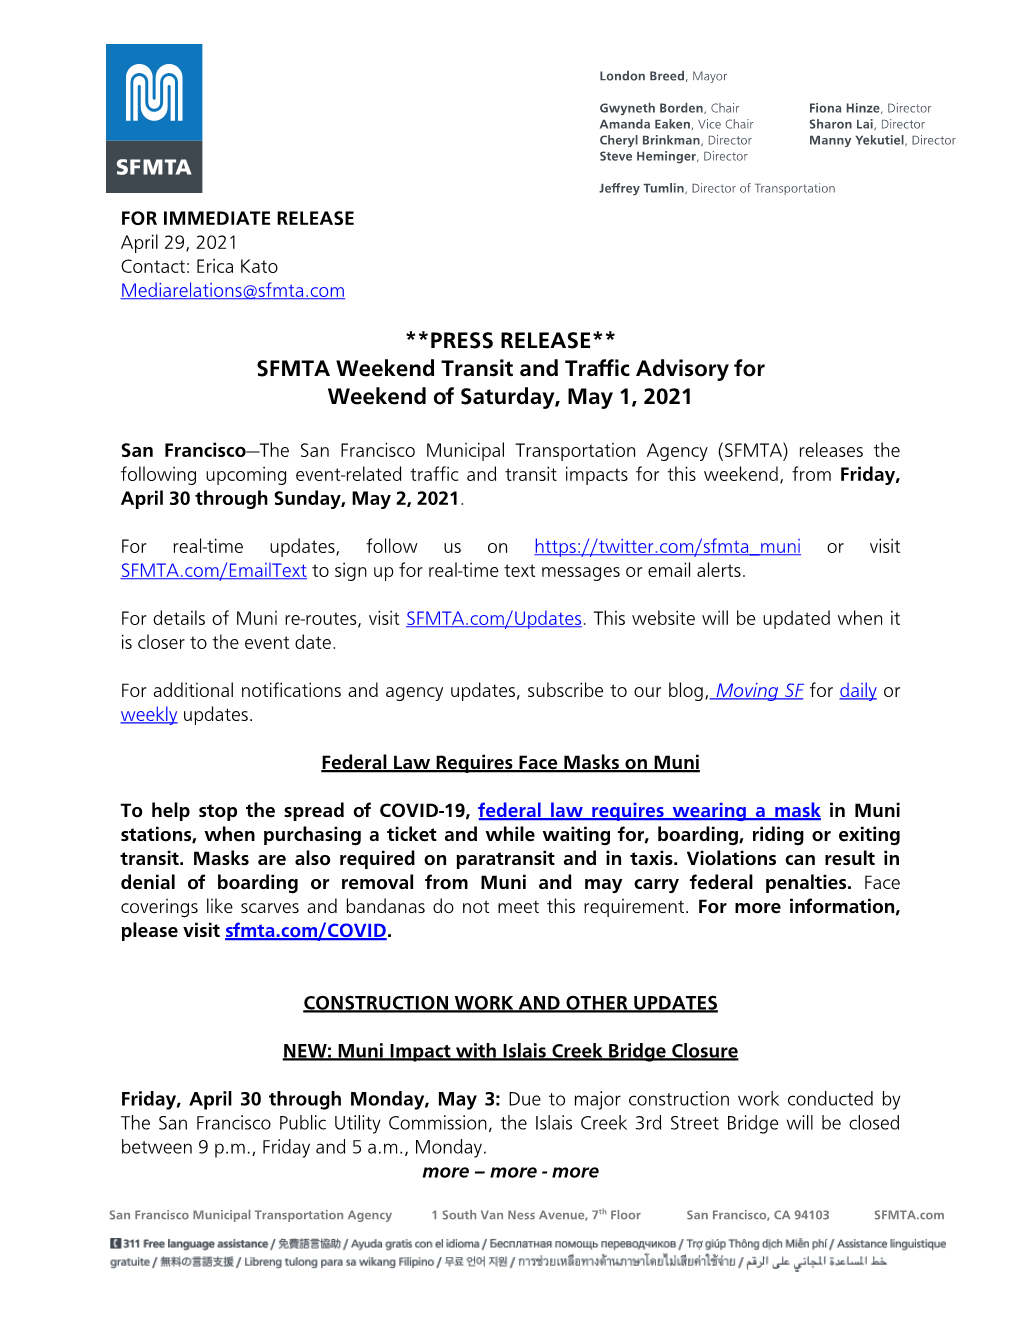 SFMTA Weekend Transit and Traffic Advisory for Saturday, May 1, 2021